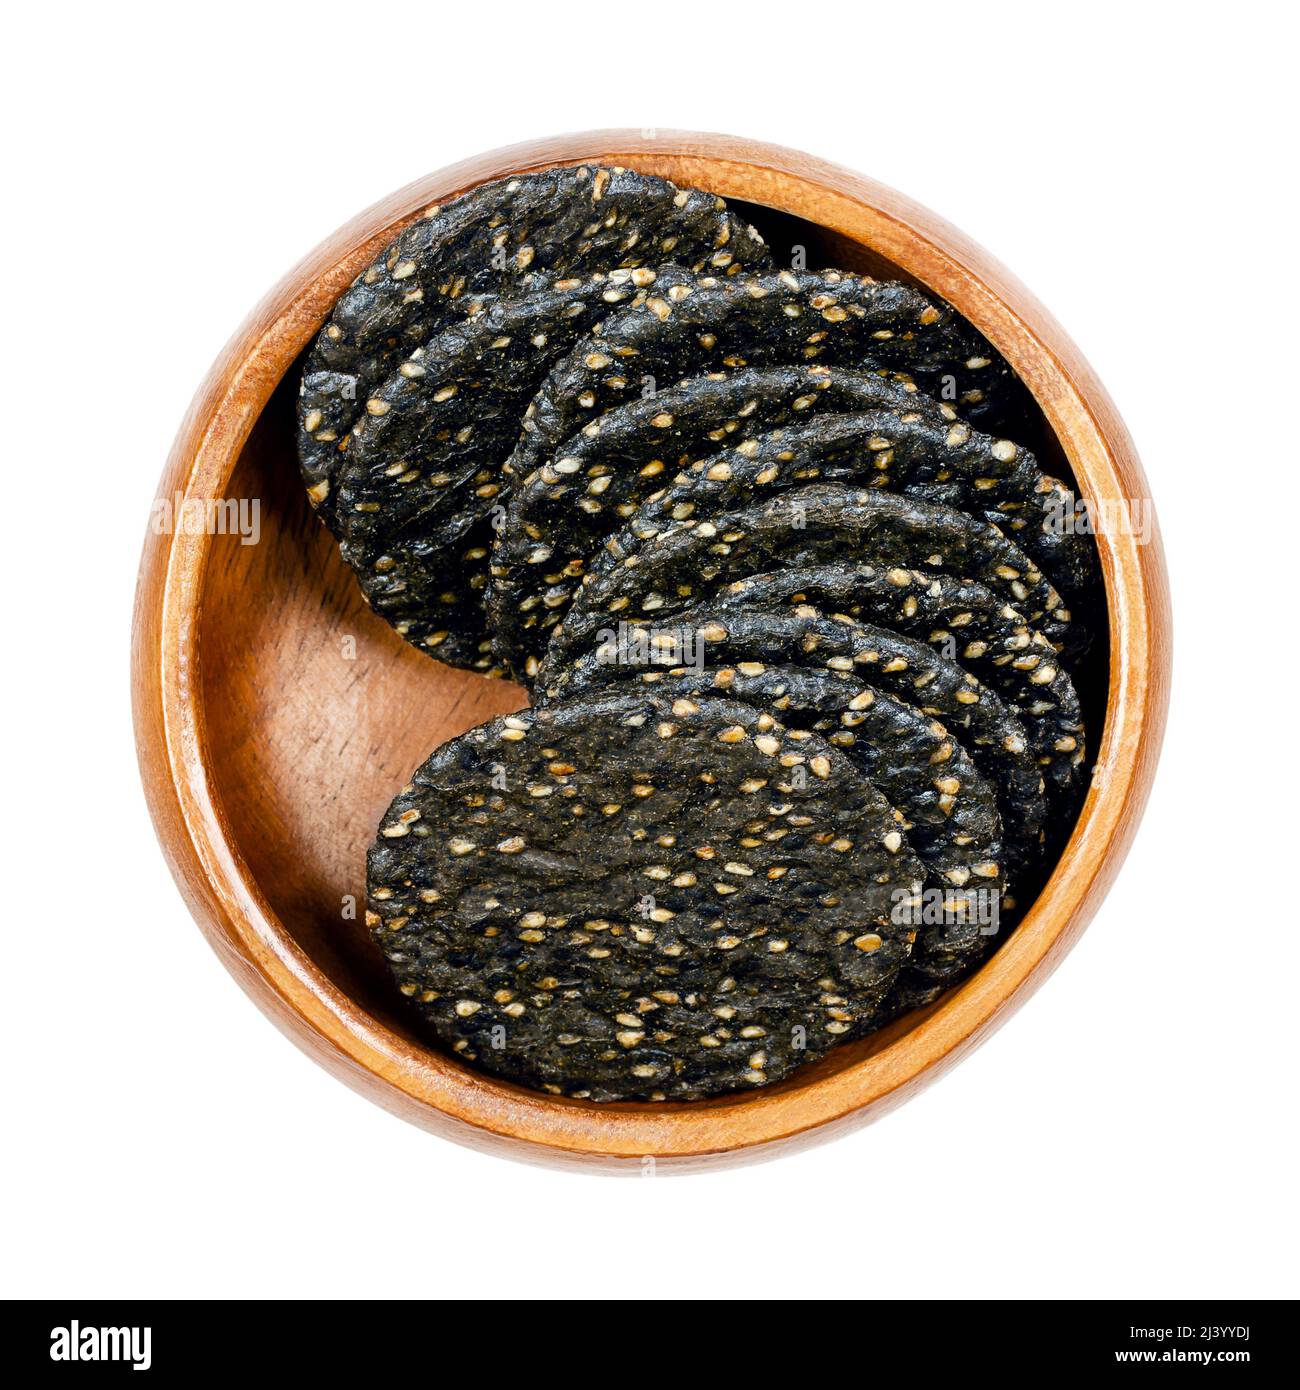 Senbei, Japanese sesame crackers, in a wooden bowl. Crispy macrobiotic crackers, made of brown rice, black sesame seeds and soy sauce. Crunchy snack. Stock Photo